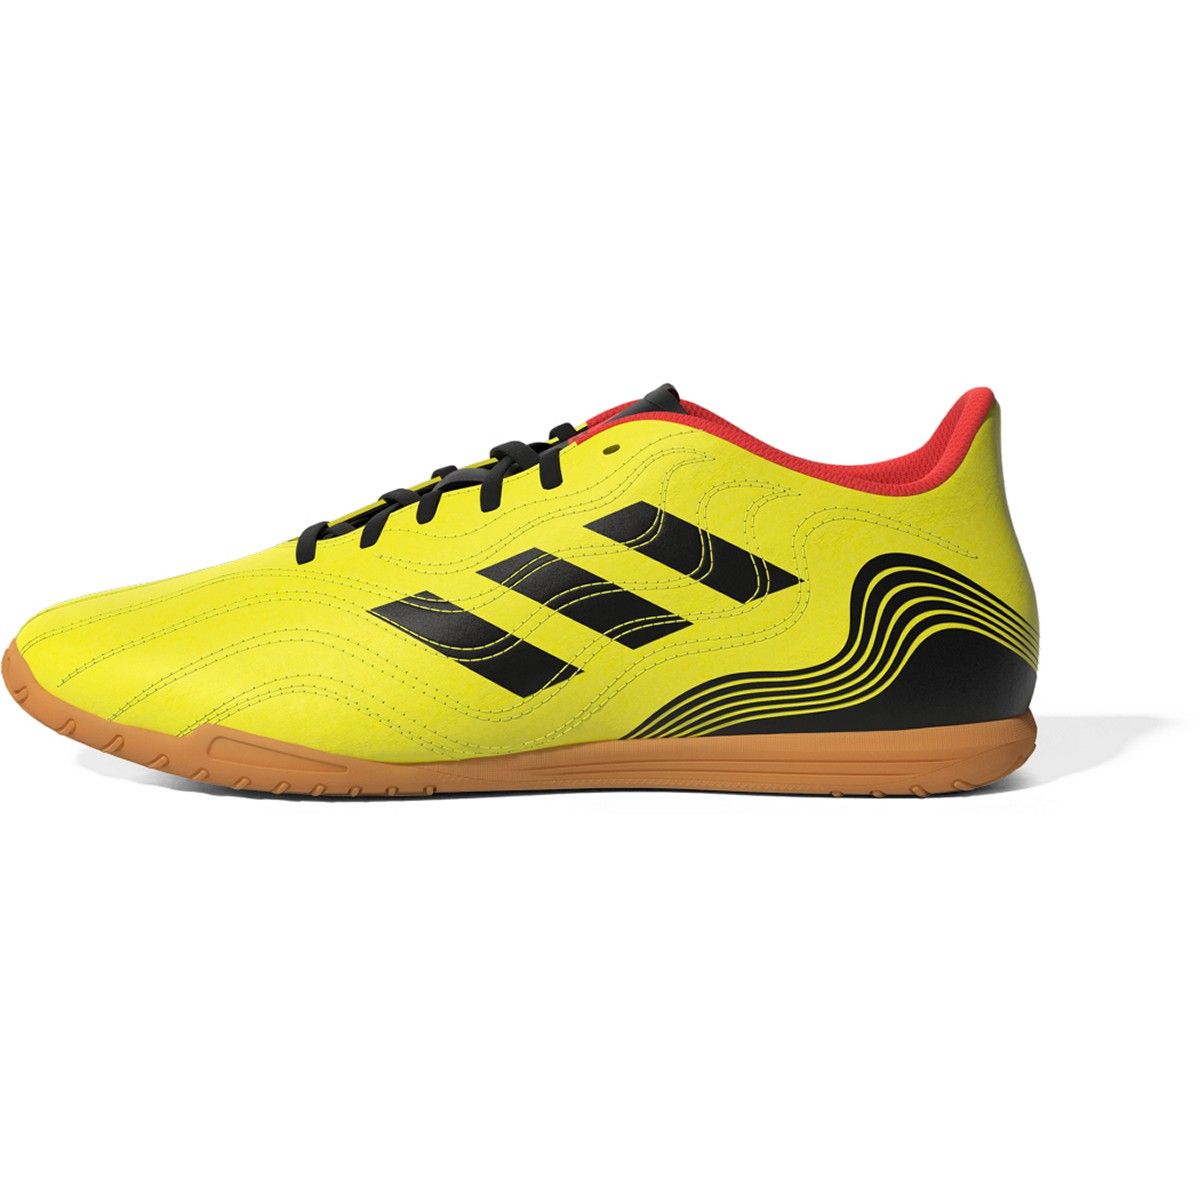 adidas Copa Sense.4 Indoor Soccer Shoes in Yellow | GZ1367